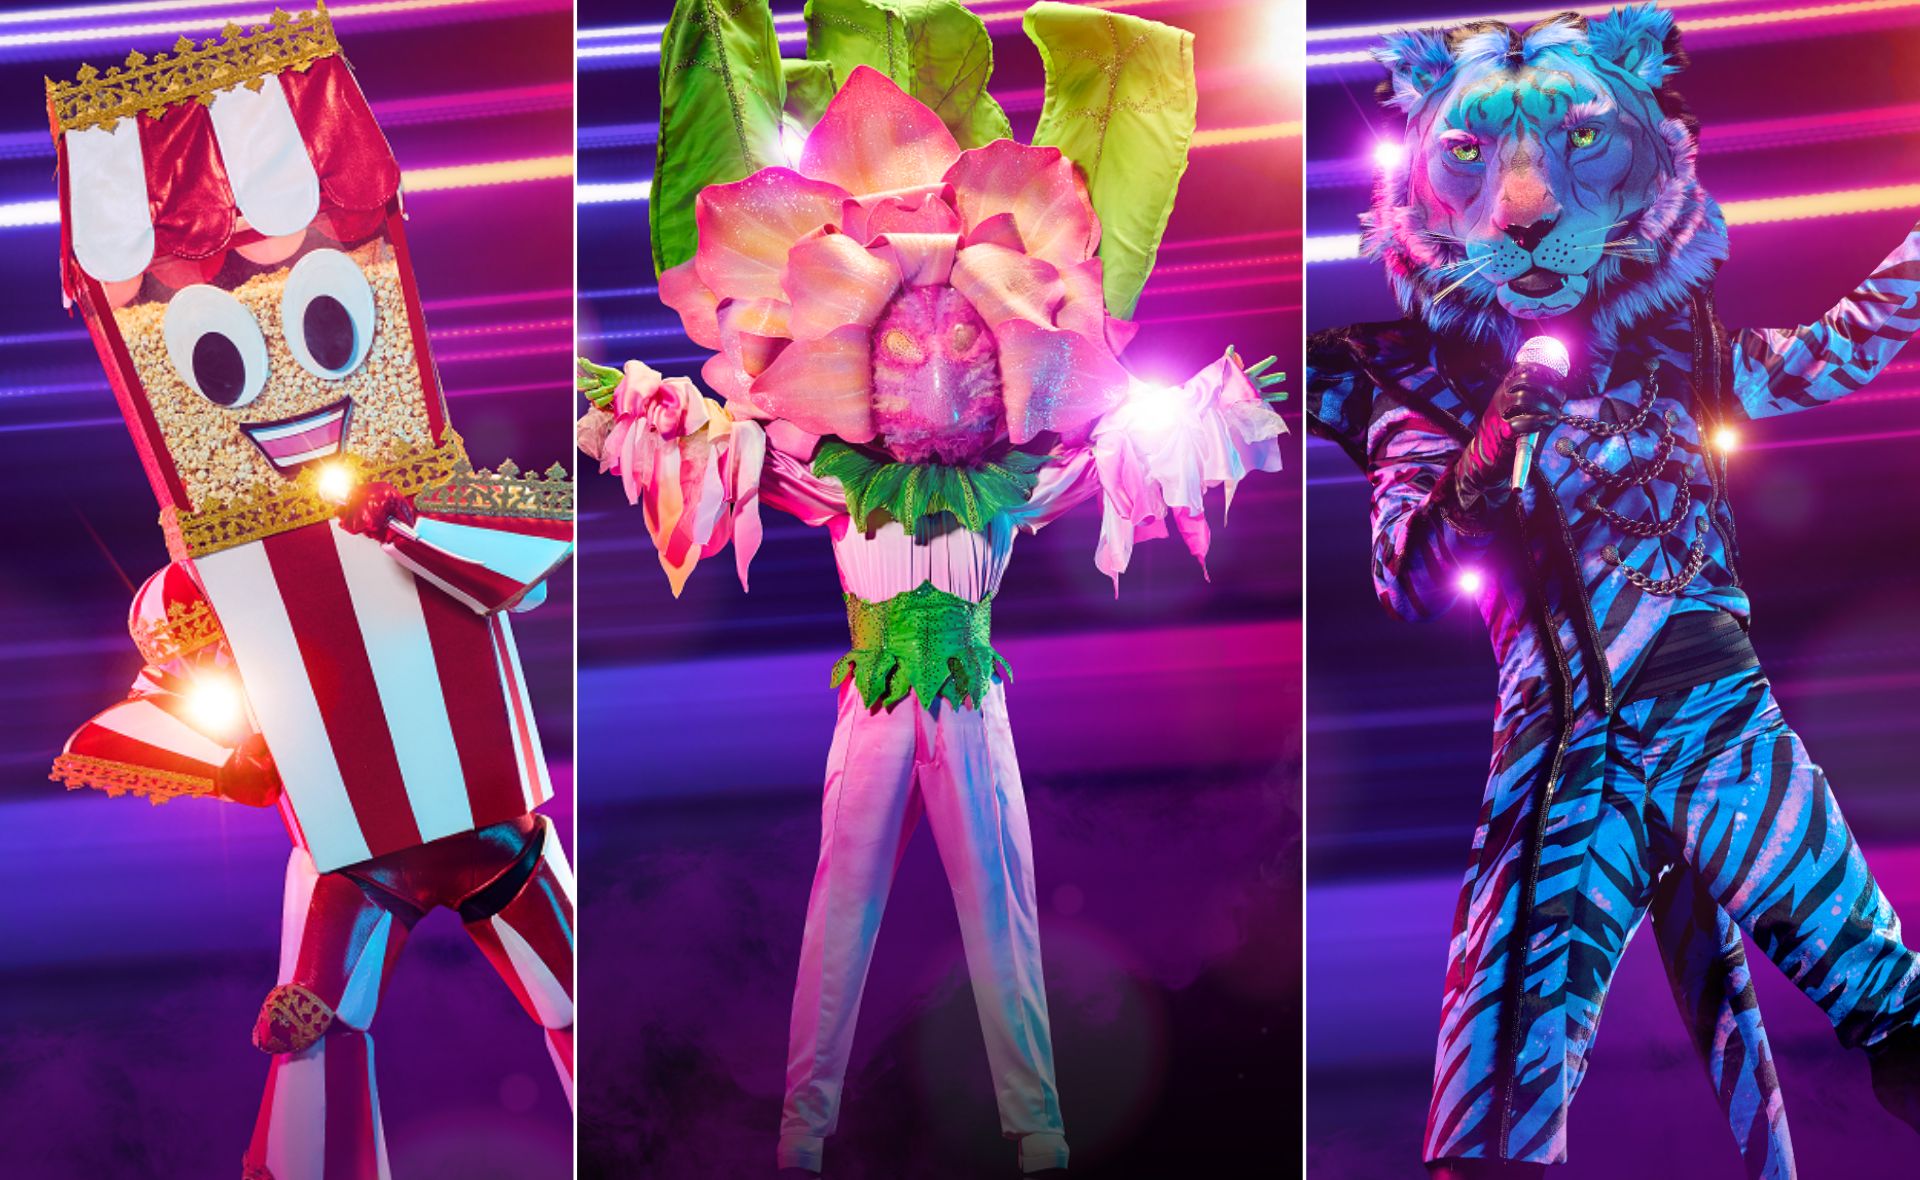 Take a guess who’s under there! Every wacky costume revealed by The Masked Singer 2022